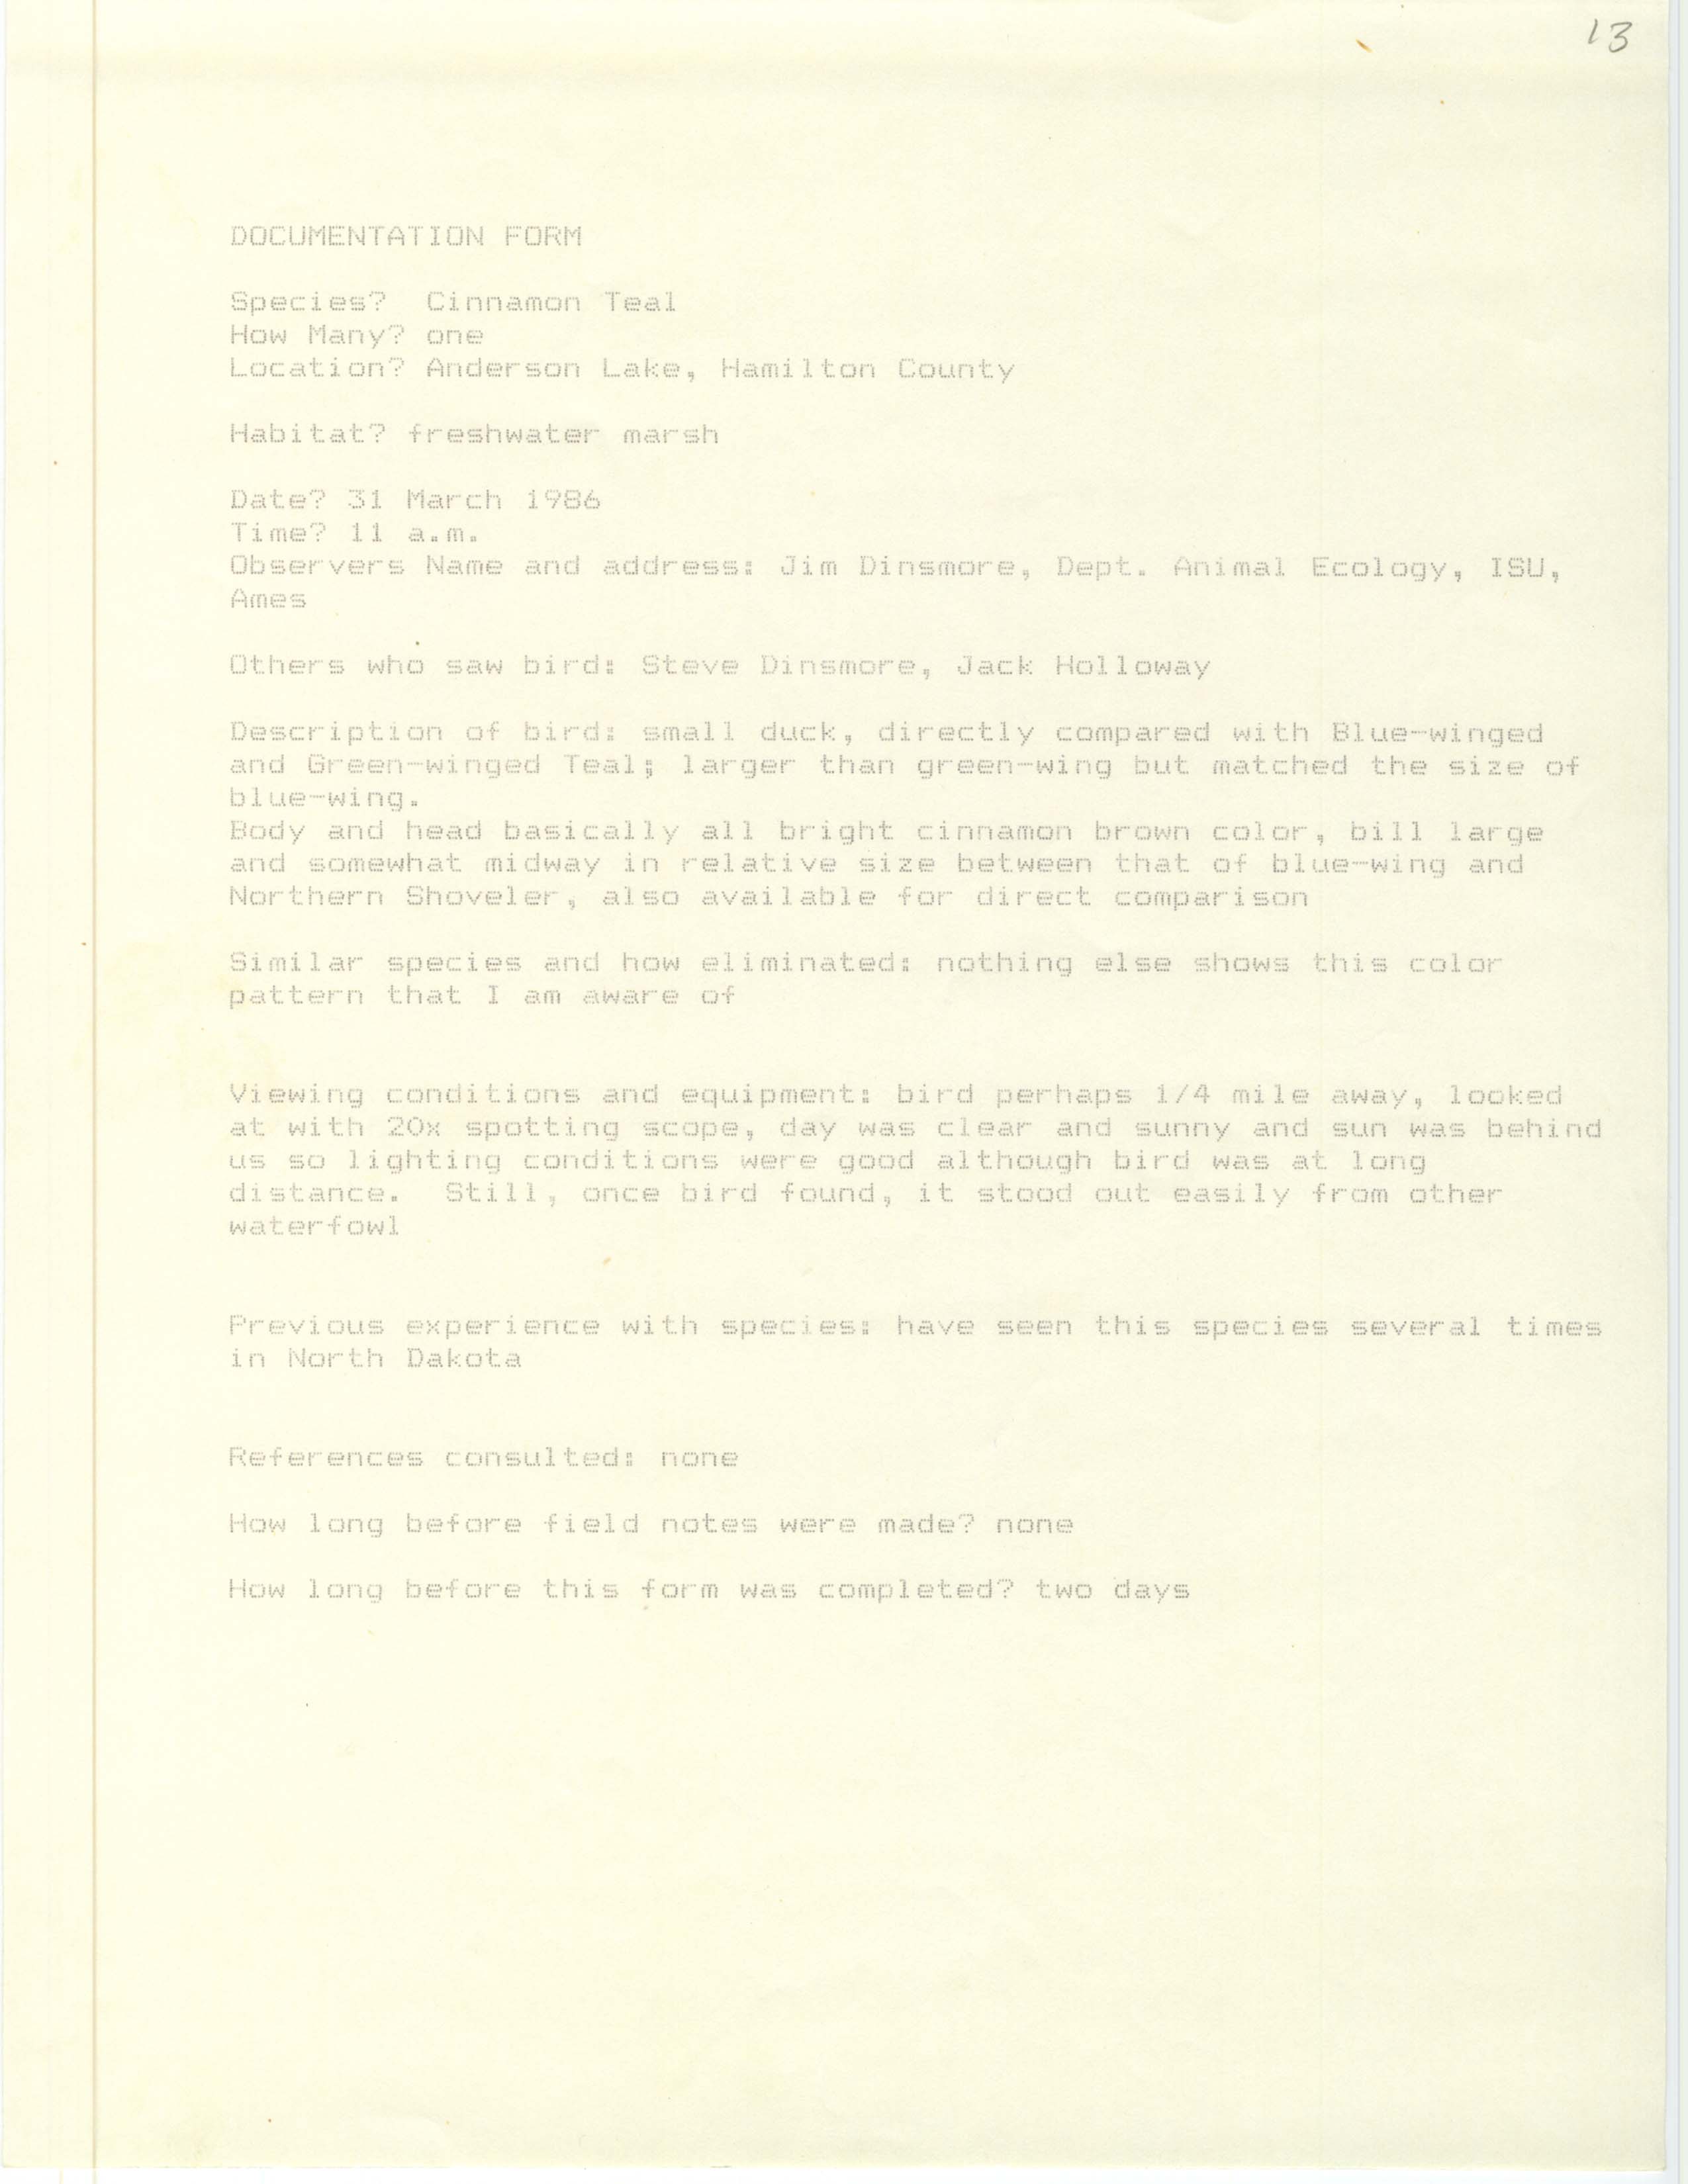 Rare bird documentation form for Cinnamon Teal at Anderson Lake, 1986